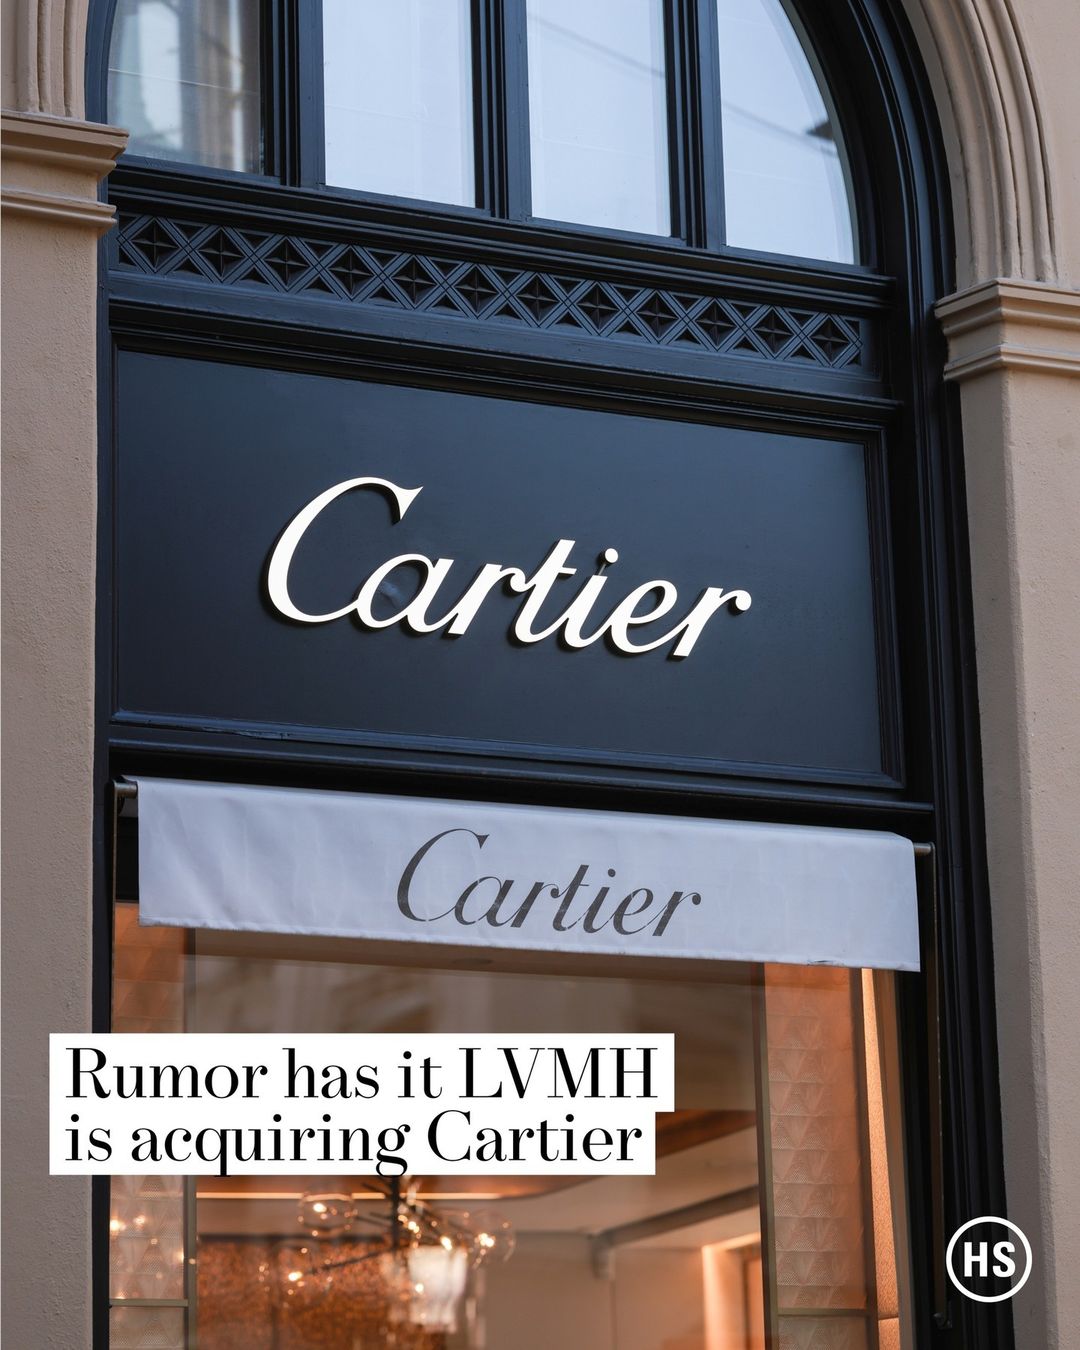 highsnobiety on X: LVMH is acquiring Cartier. That's if internet rumors  are to be believed.⁠ While nothing concrete has surfaced yet, the shoe  certainly does fit.  / X